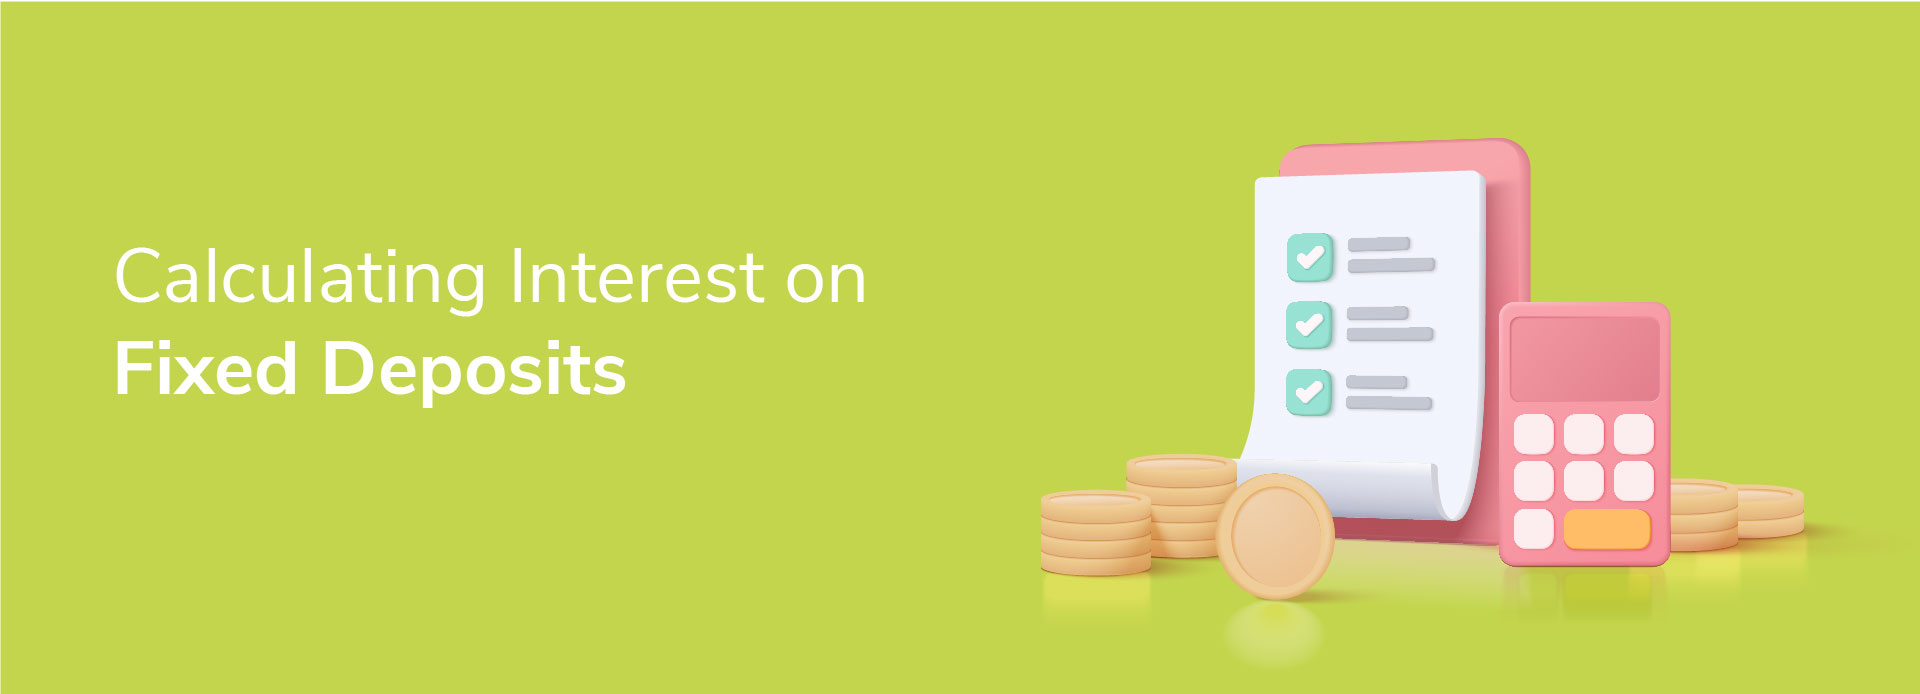 How to Calculate Interest on Fixed Deposits: A Step-by-Step Guide 